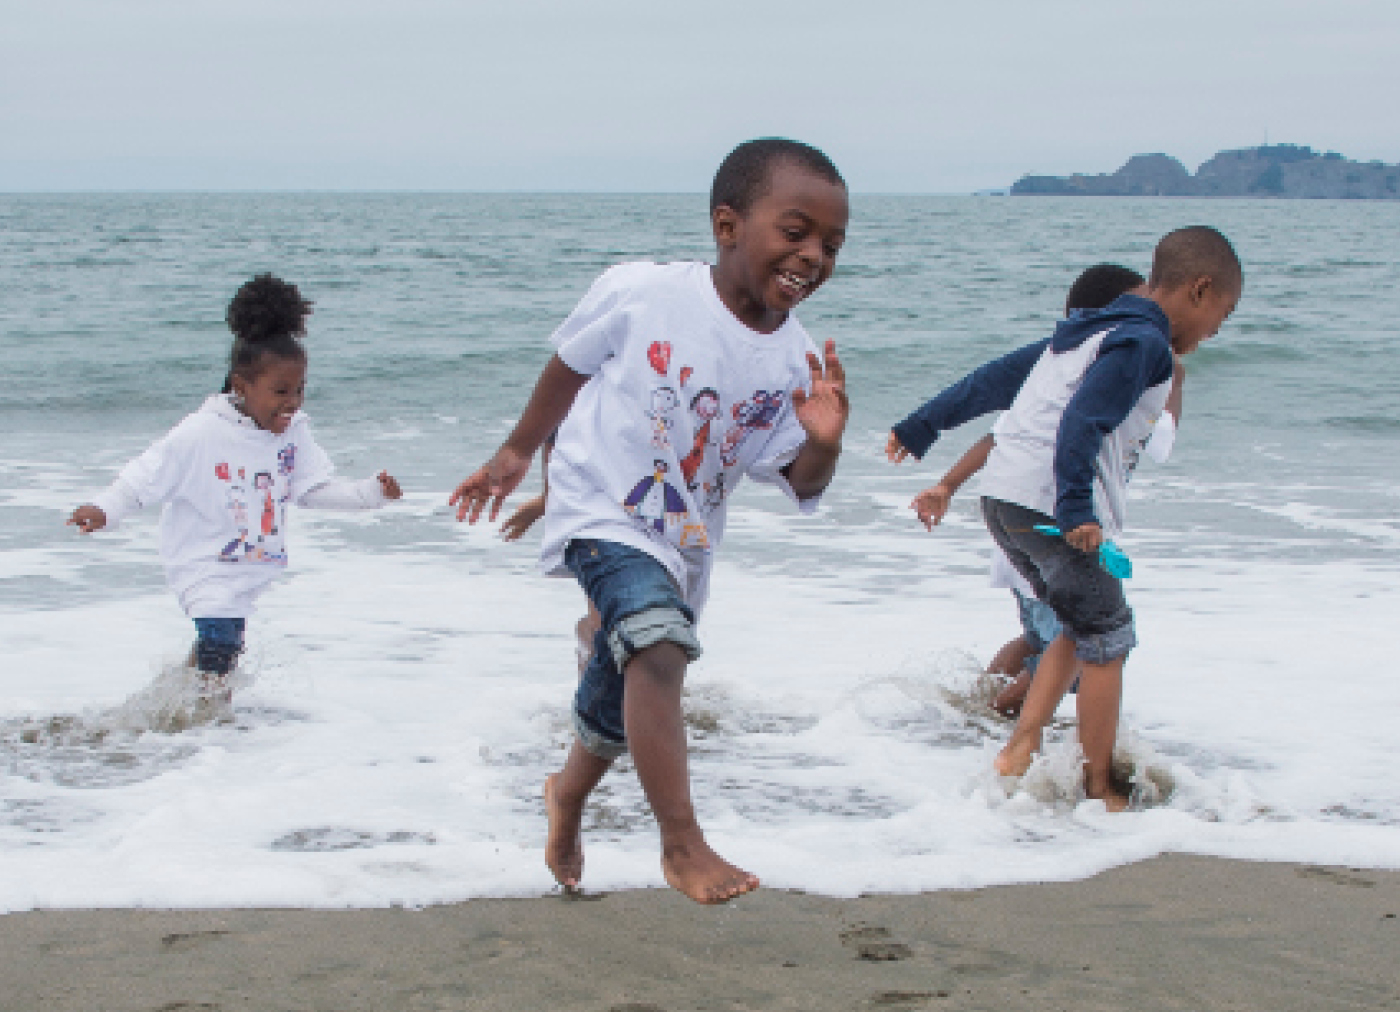 Children in shorts and t-shirts smile and splash in the small waves on the beach